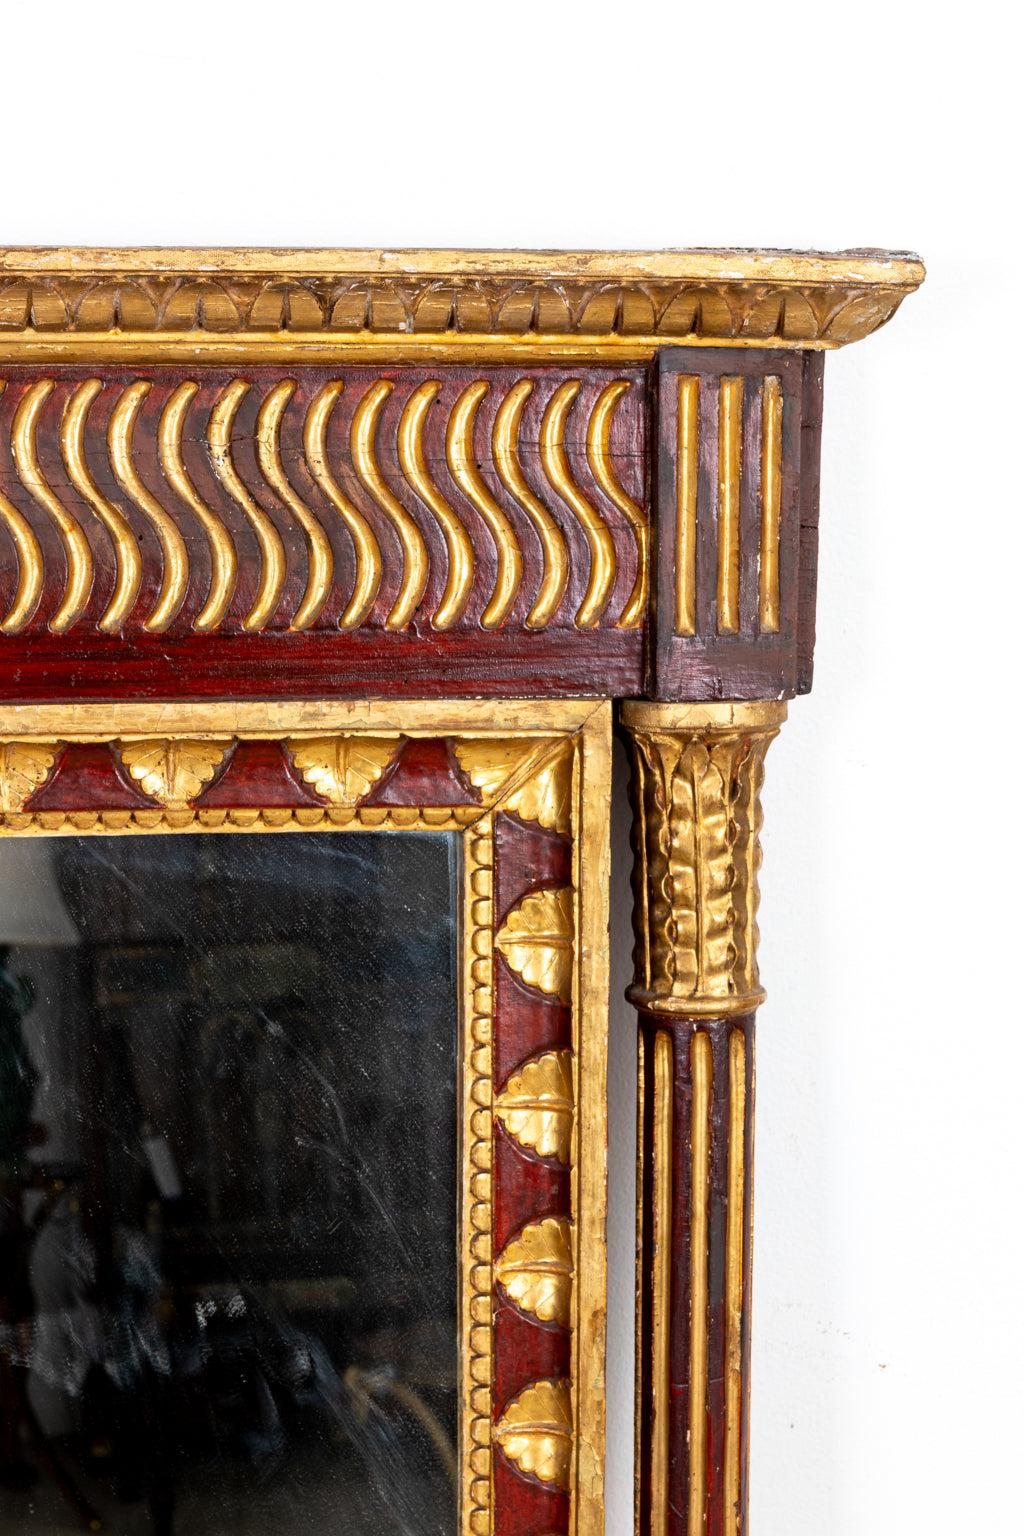 Early 19th century painted and gilt wood mirror in the Empire style with a molded rectangular shaped cornice accented by a central rosette medallion. The mirror is further detailed with round, fluted columns framing the sides of the mirror and